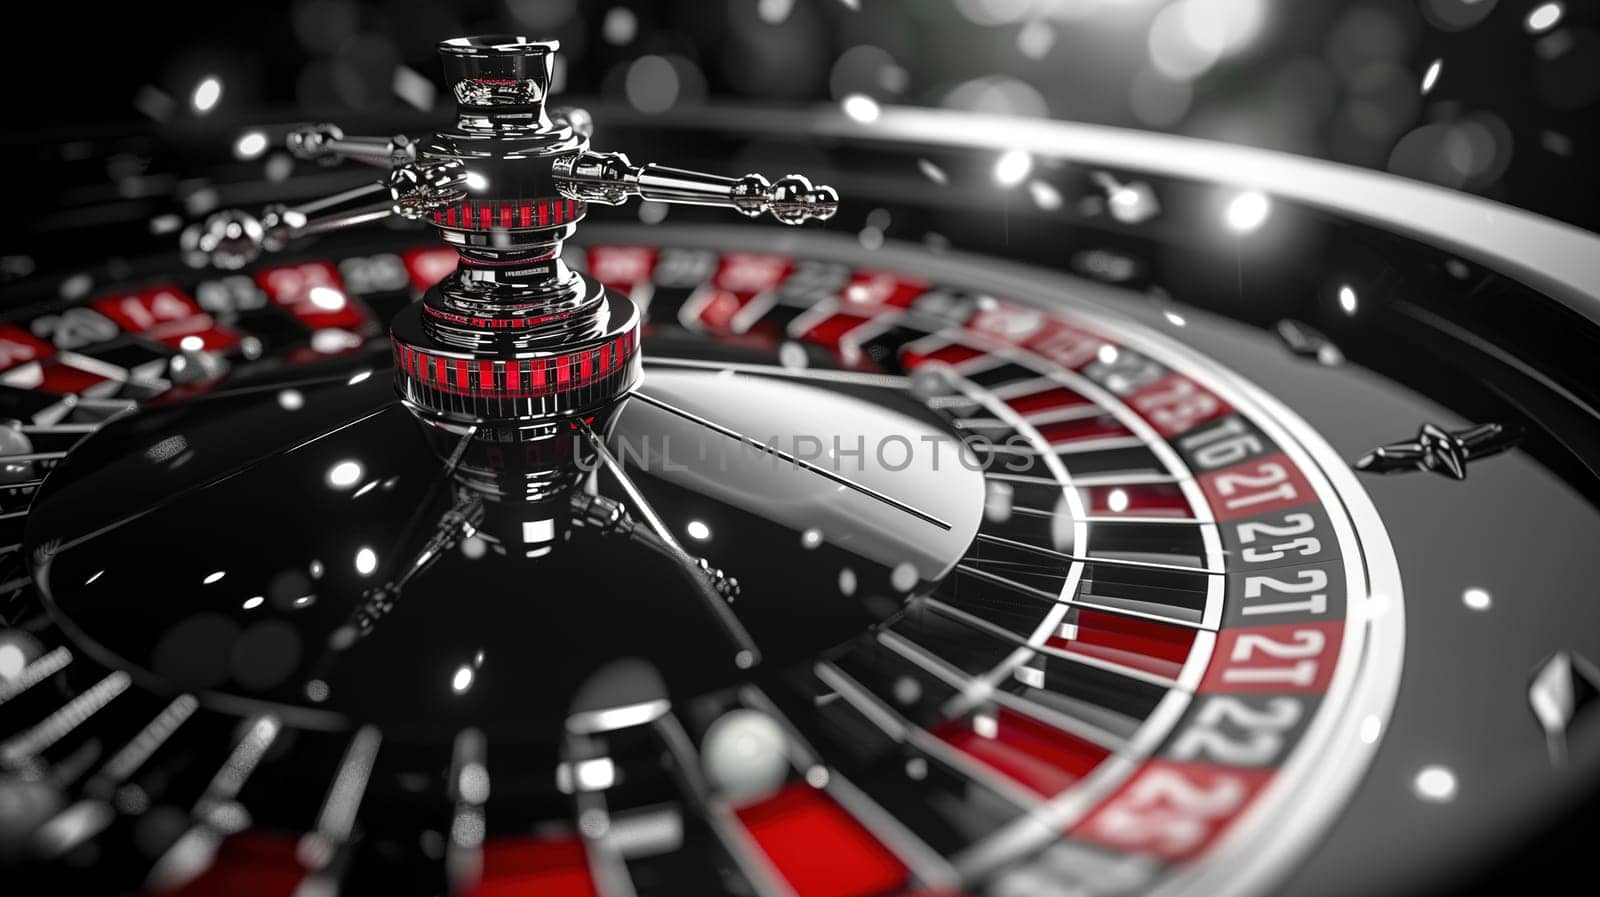 In the close-up shot, a casino roulette wheel is prominently displayed, featuring alternating red and black numbers around its circumference. The wheel is an essential element in the game of roulette, a popular choice in gambling establishments.